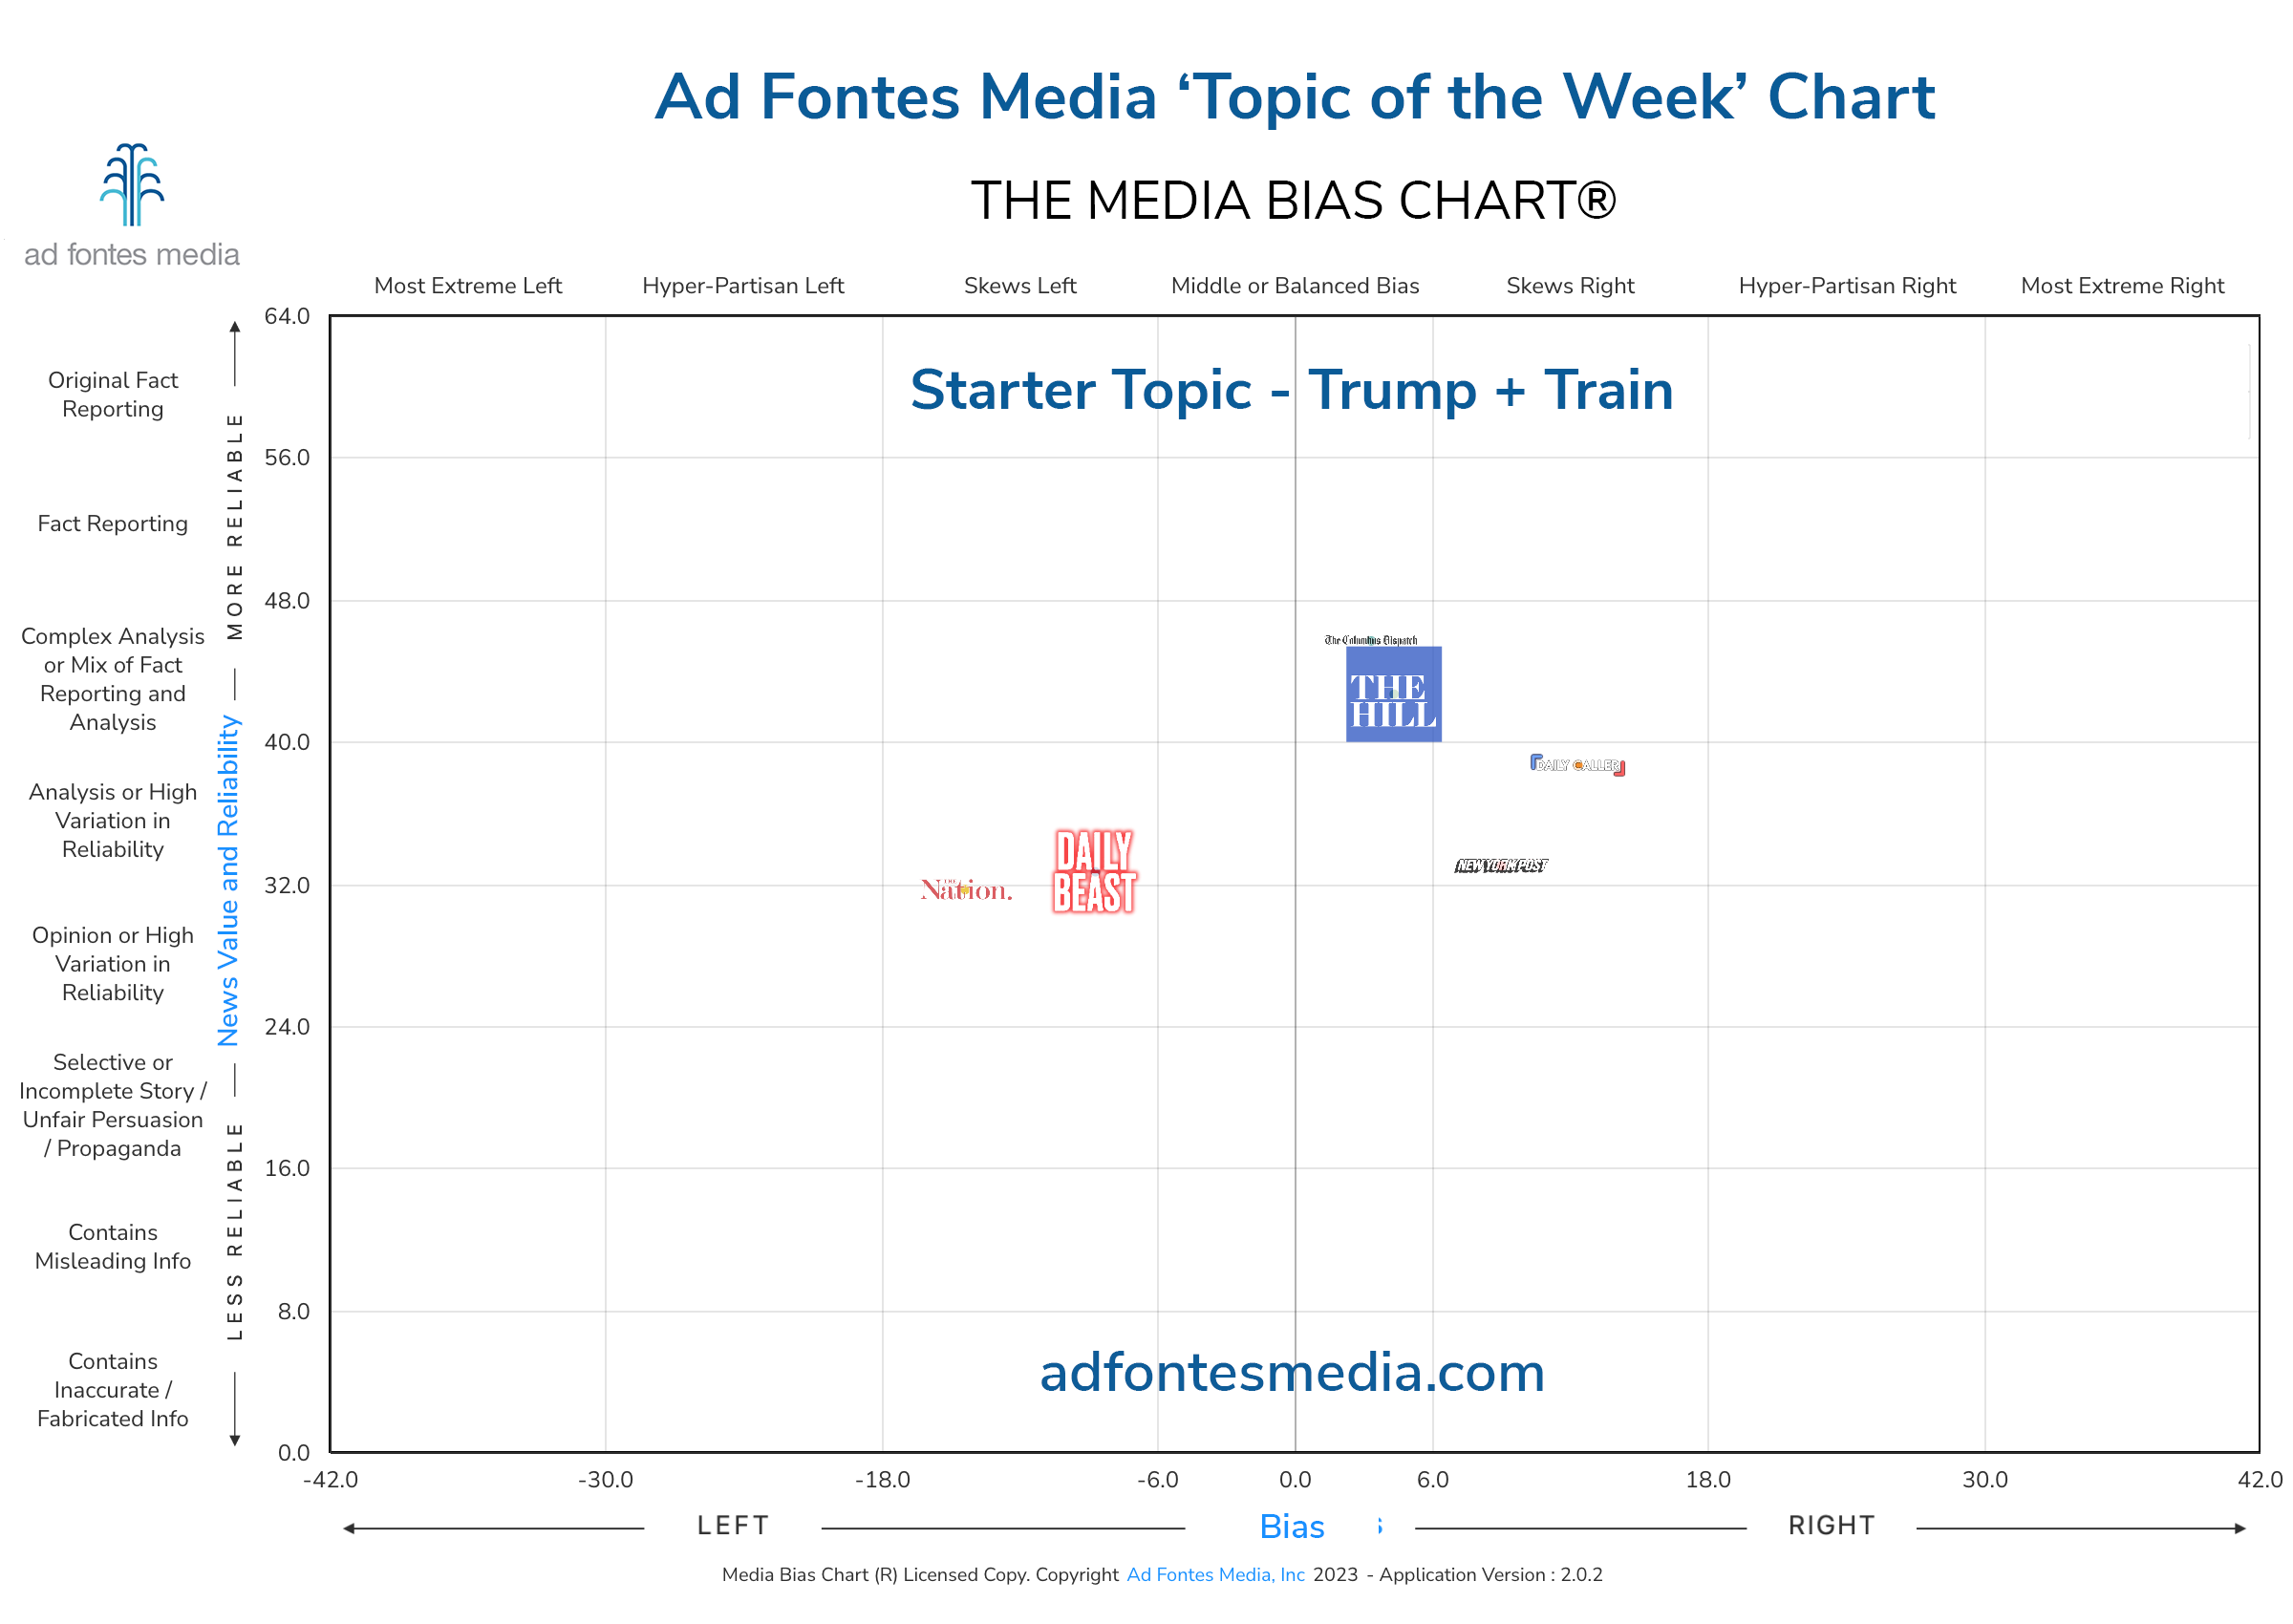 Scores of the Trump + Train articles on the chart